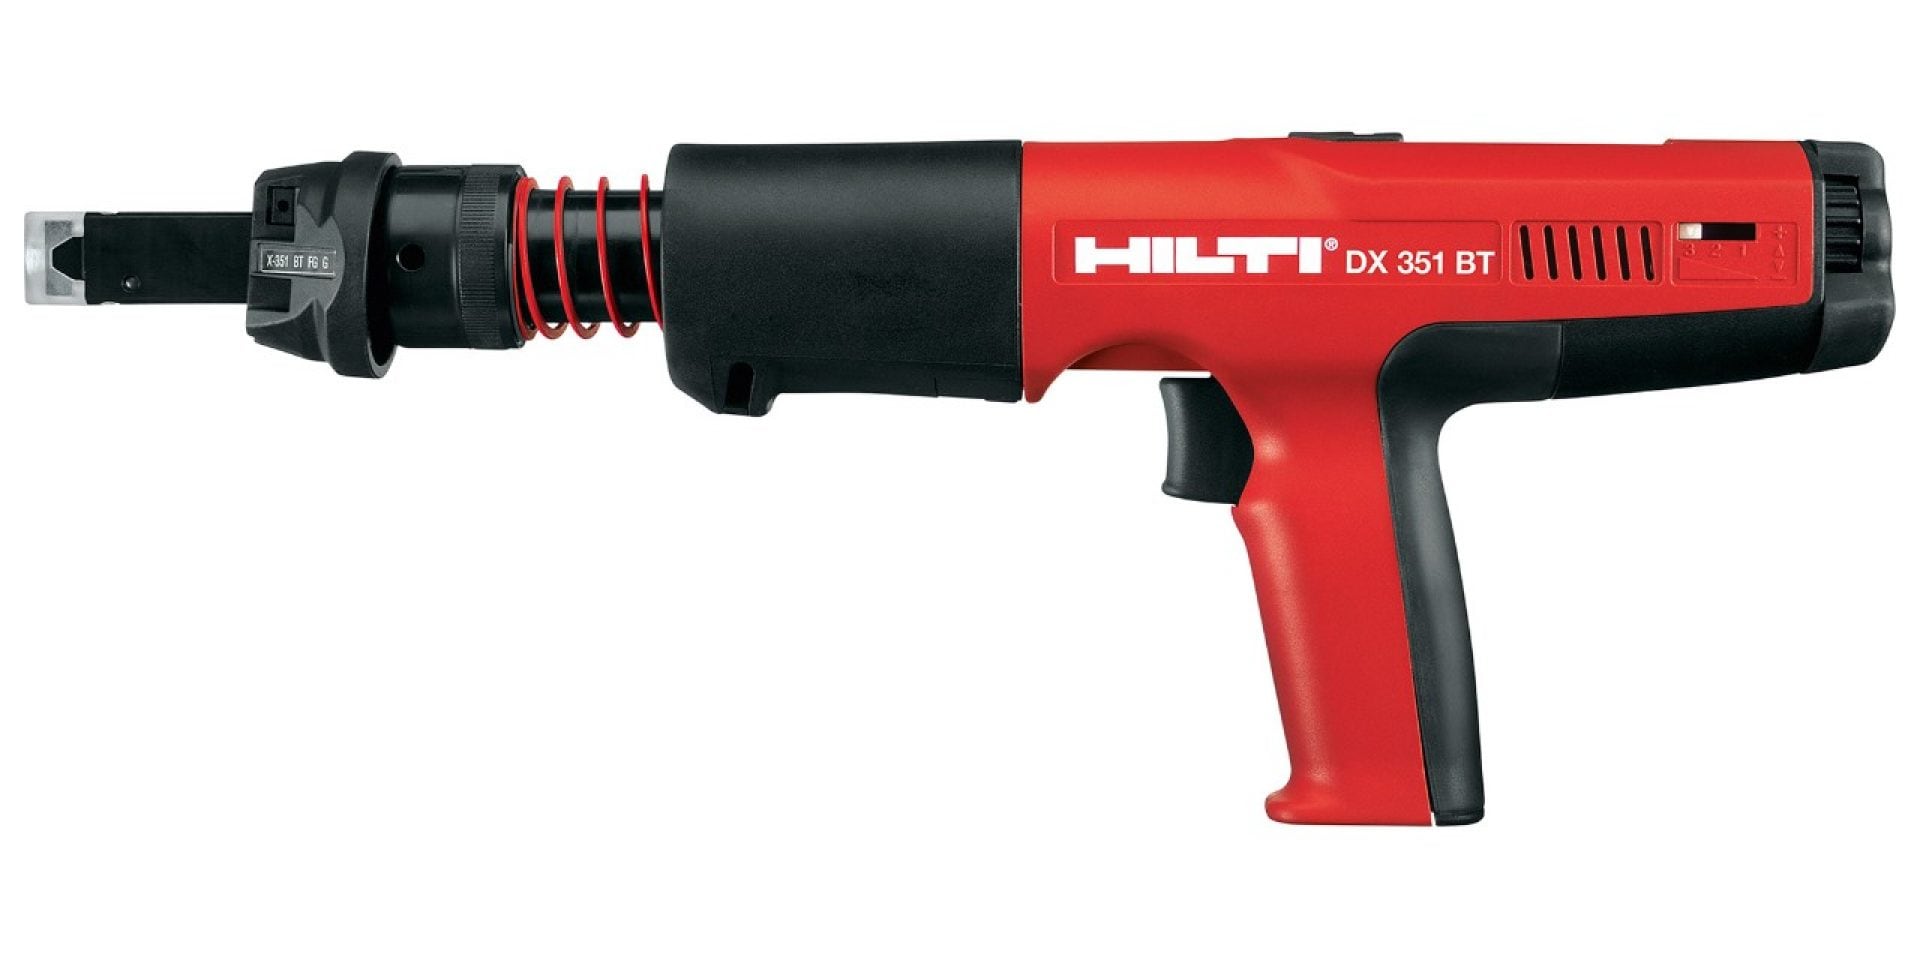 Hilti DX 351-BT fully automatic powder-actuated tool